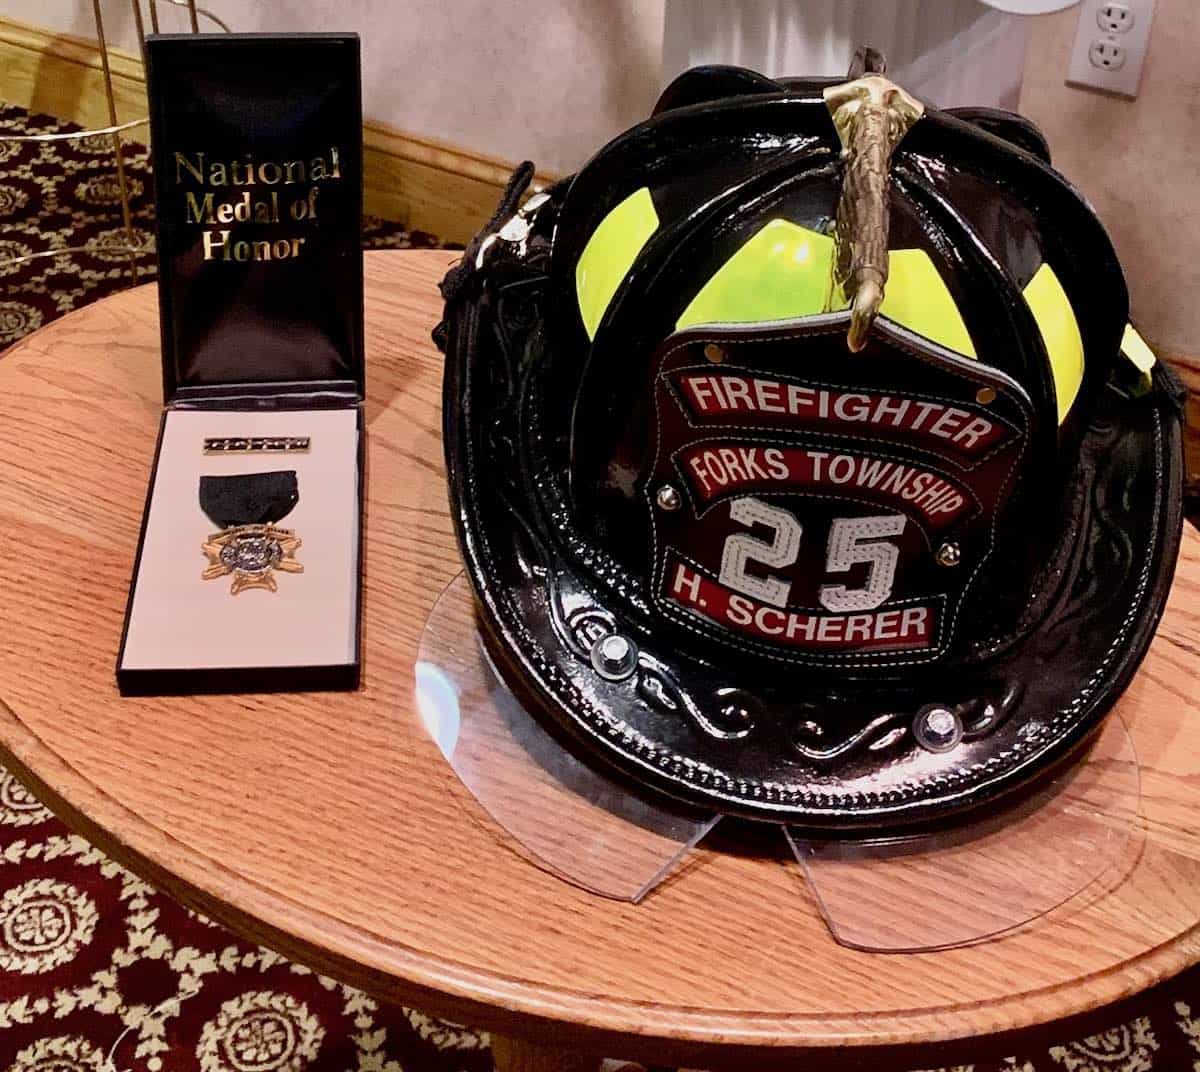 Firefighter helmet and medal of honor; a teen celebrates a hero.